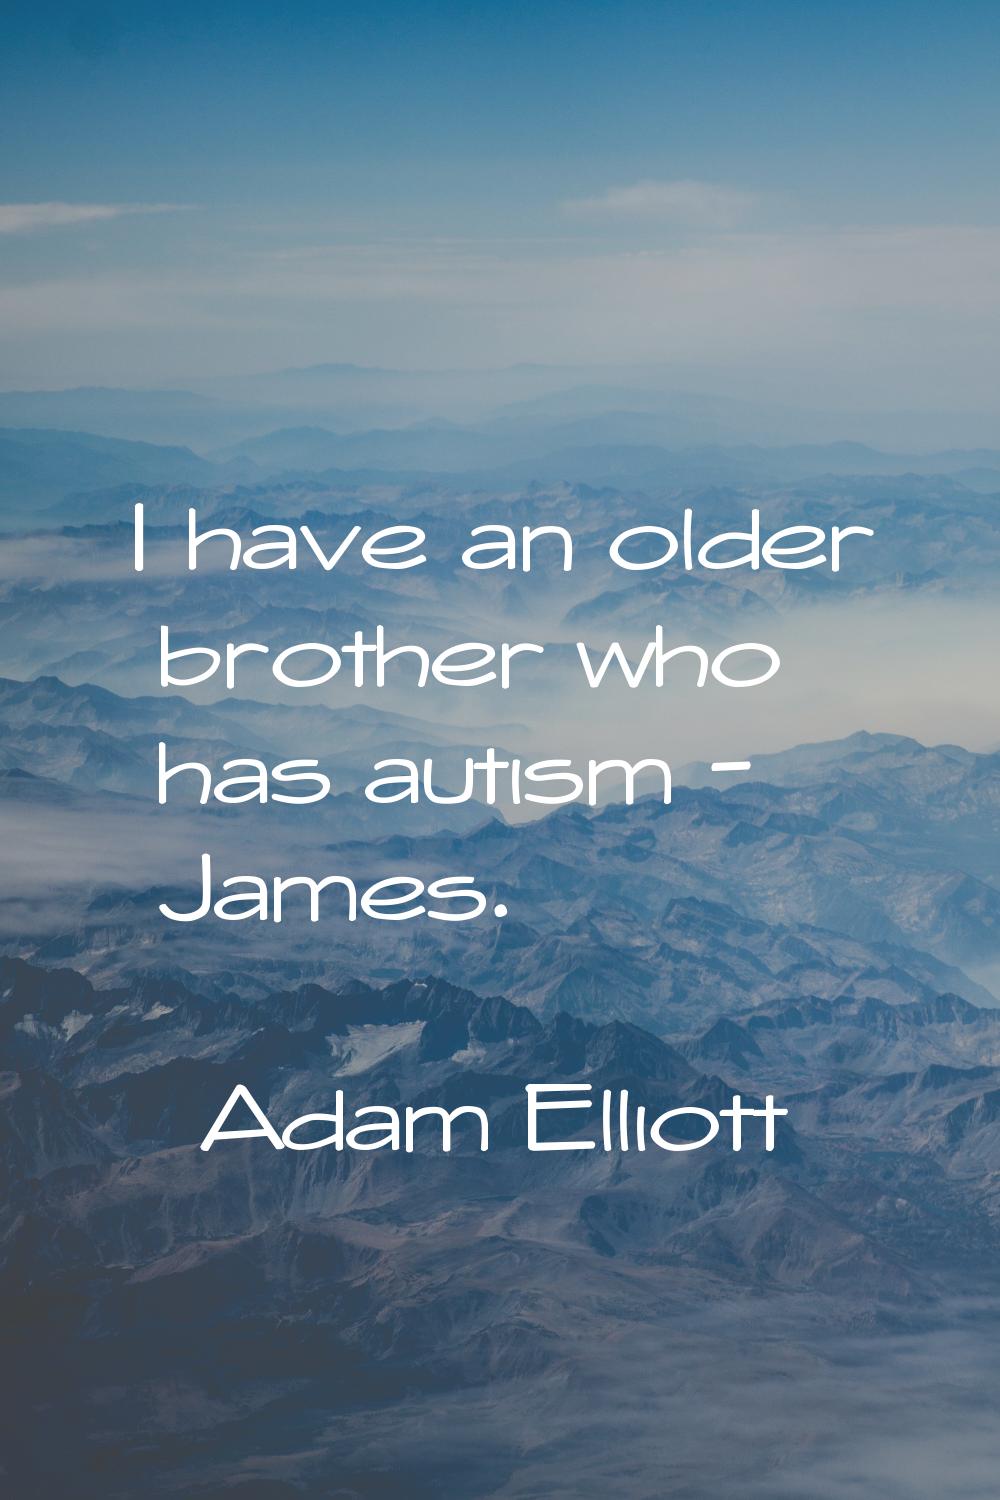 I have an older brother who has autism - James.